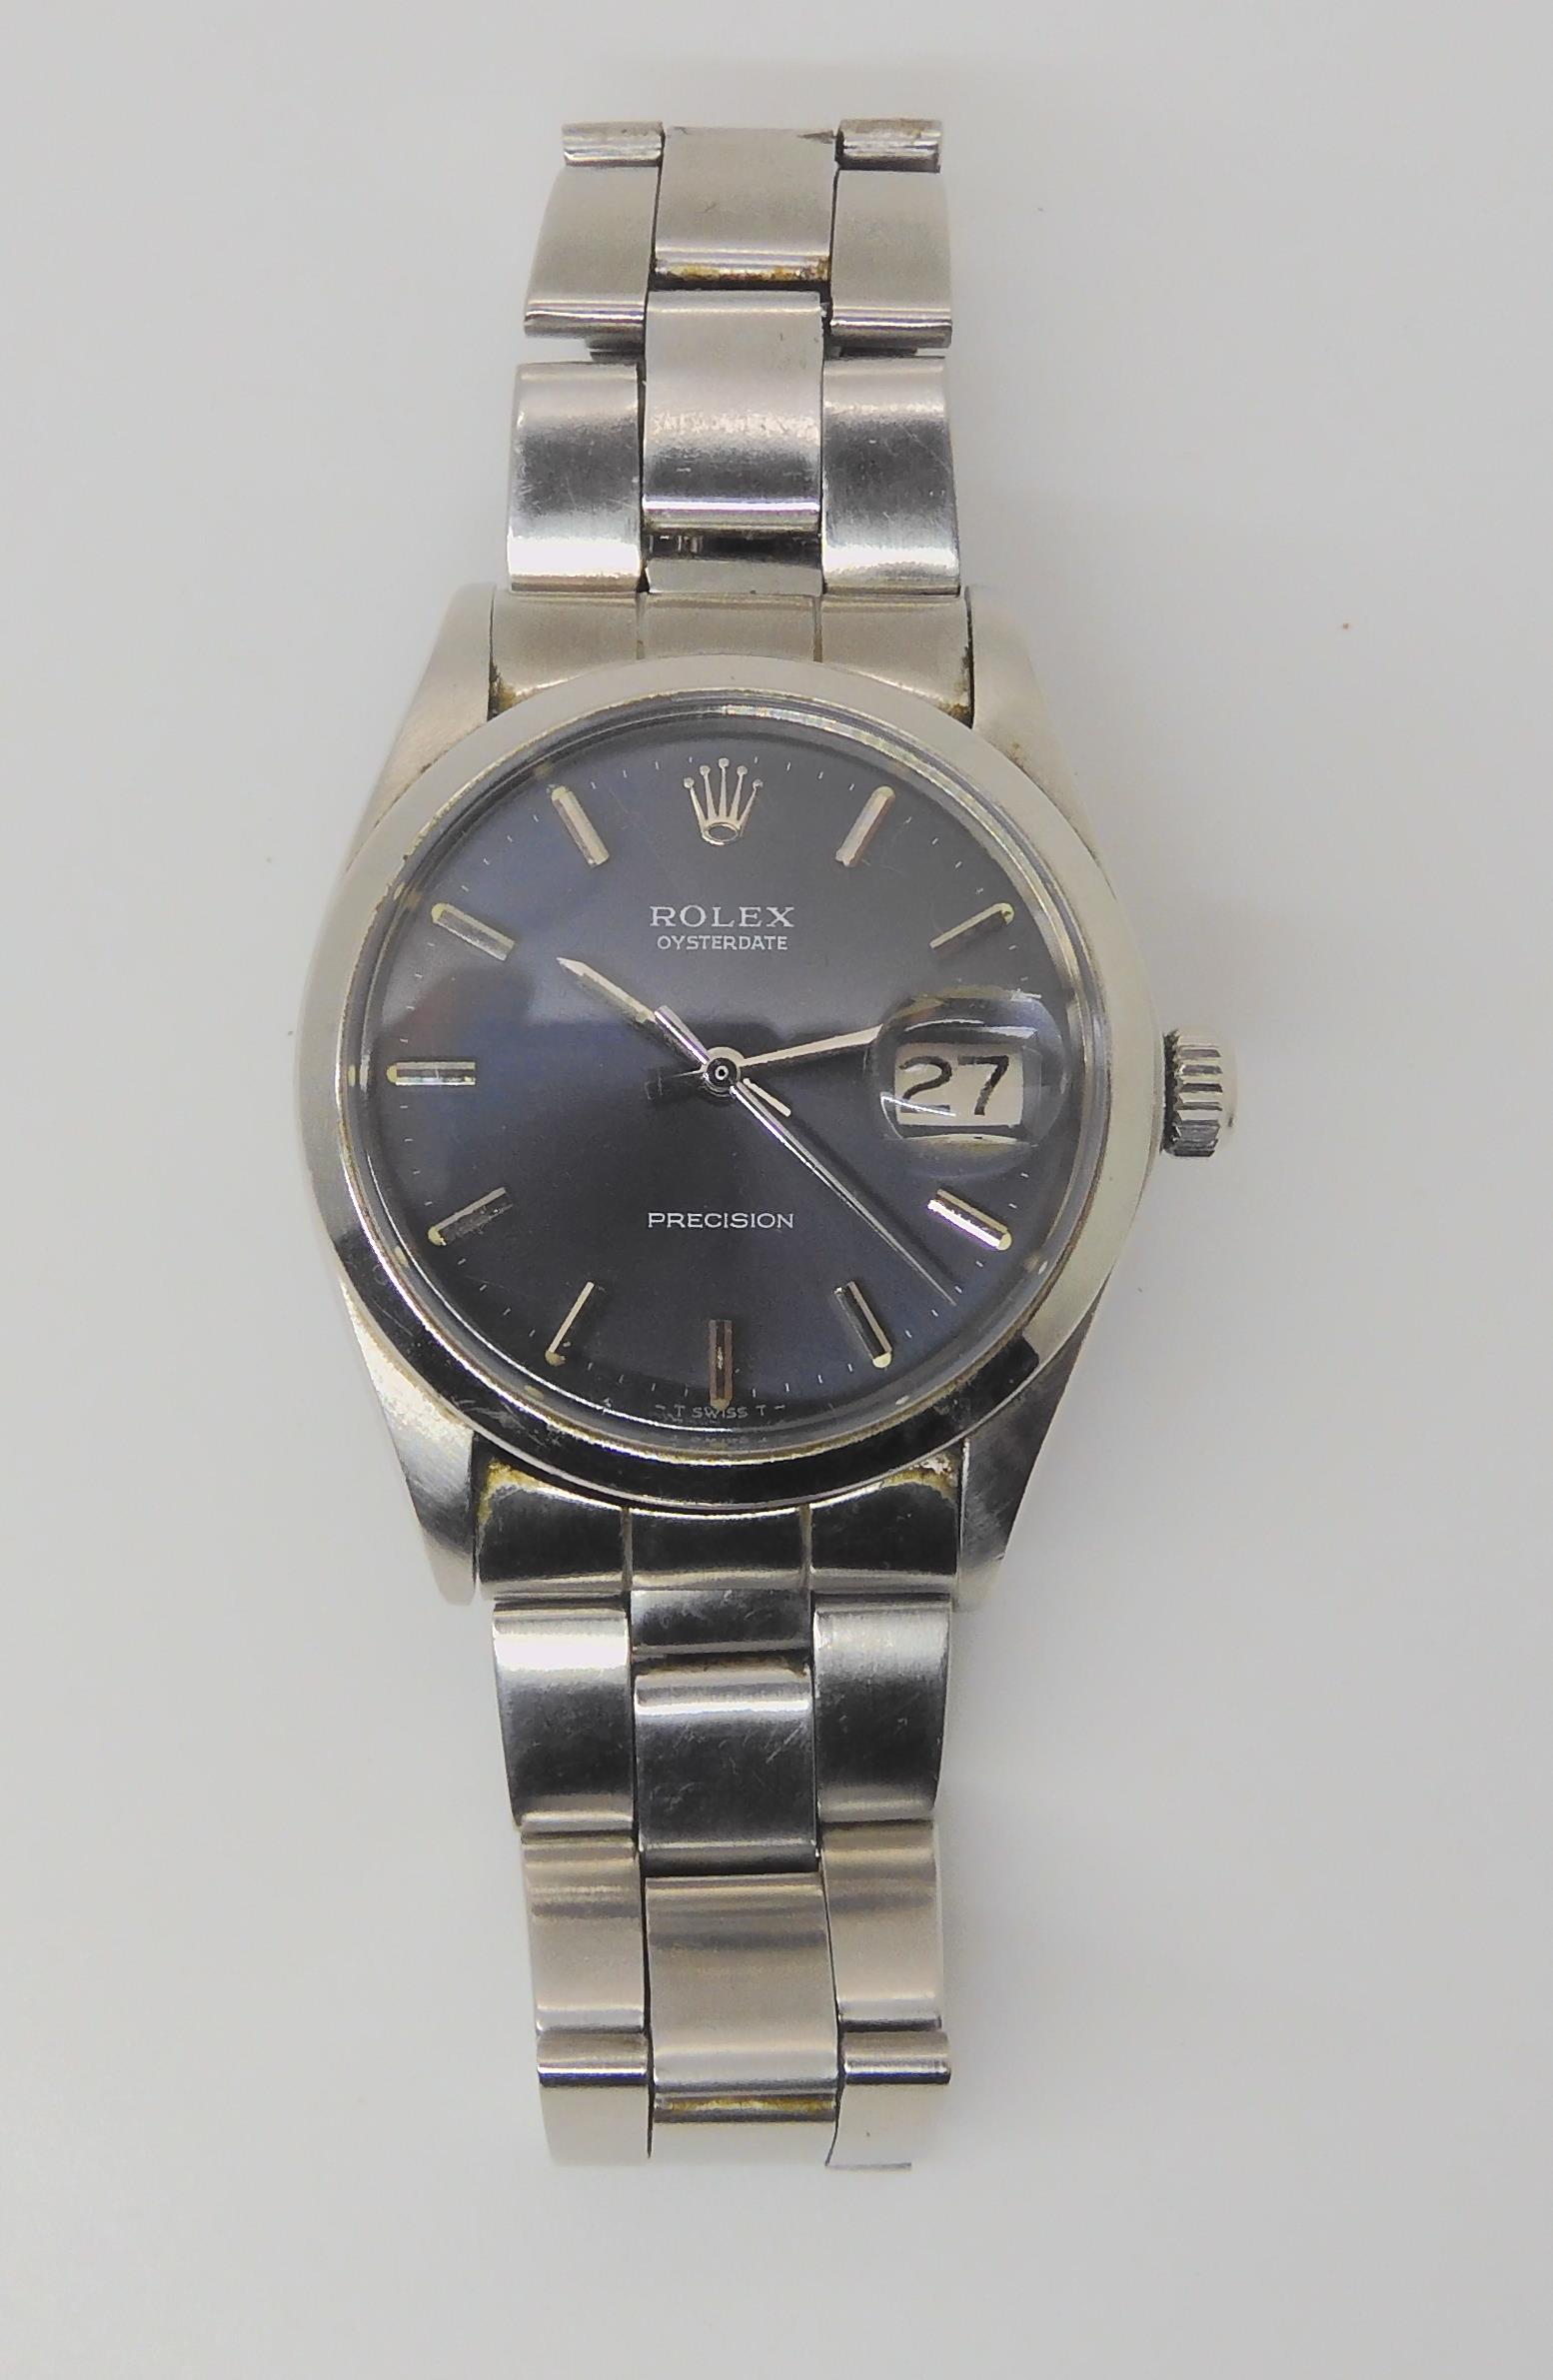 A ROLEX OYSTERDATE PRECISION with dark grey satined dial, silver coloured baton numerals, hands, and - Image 12 of 14